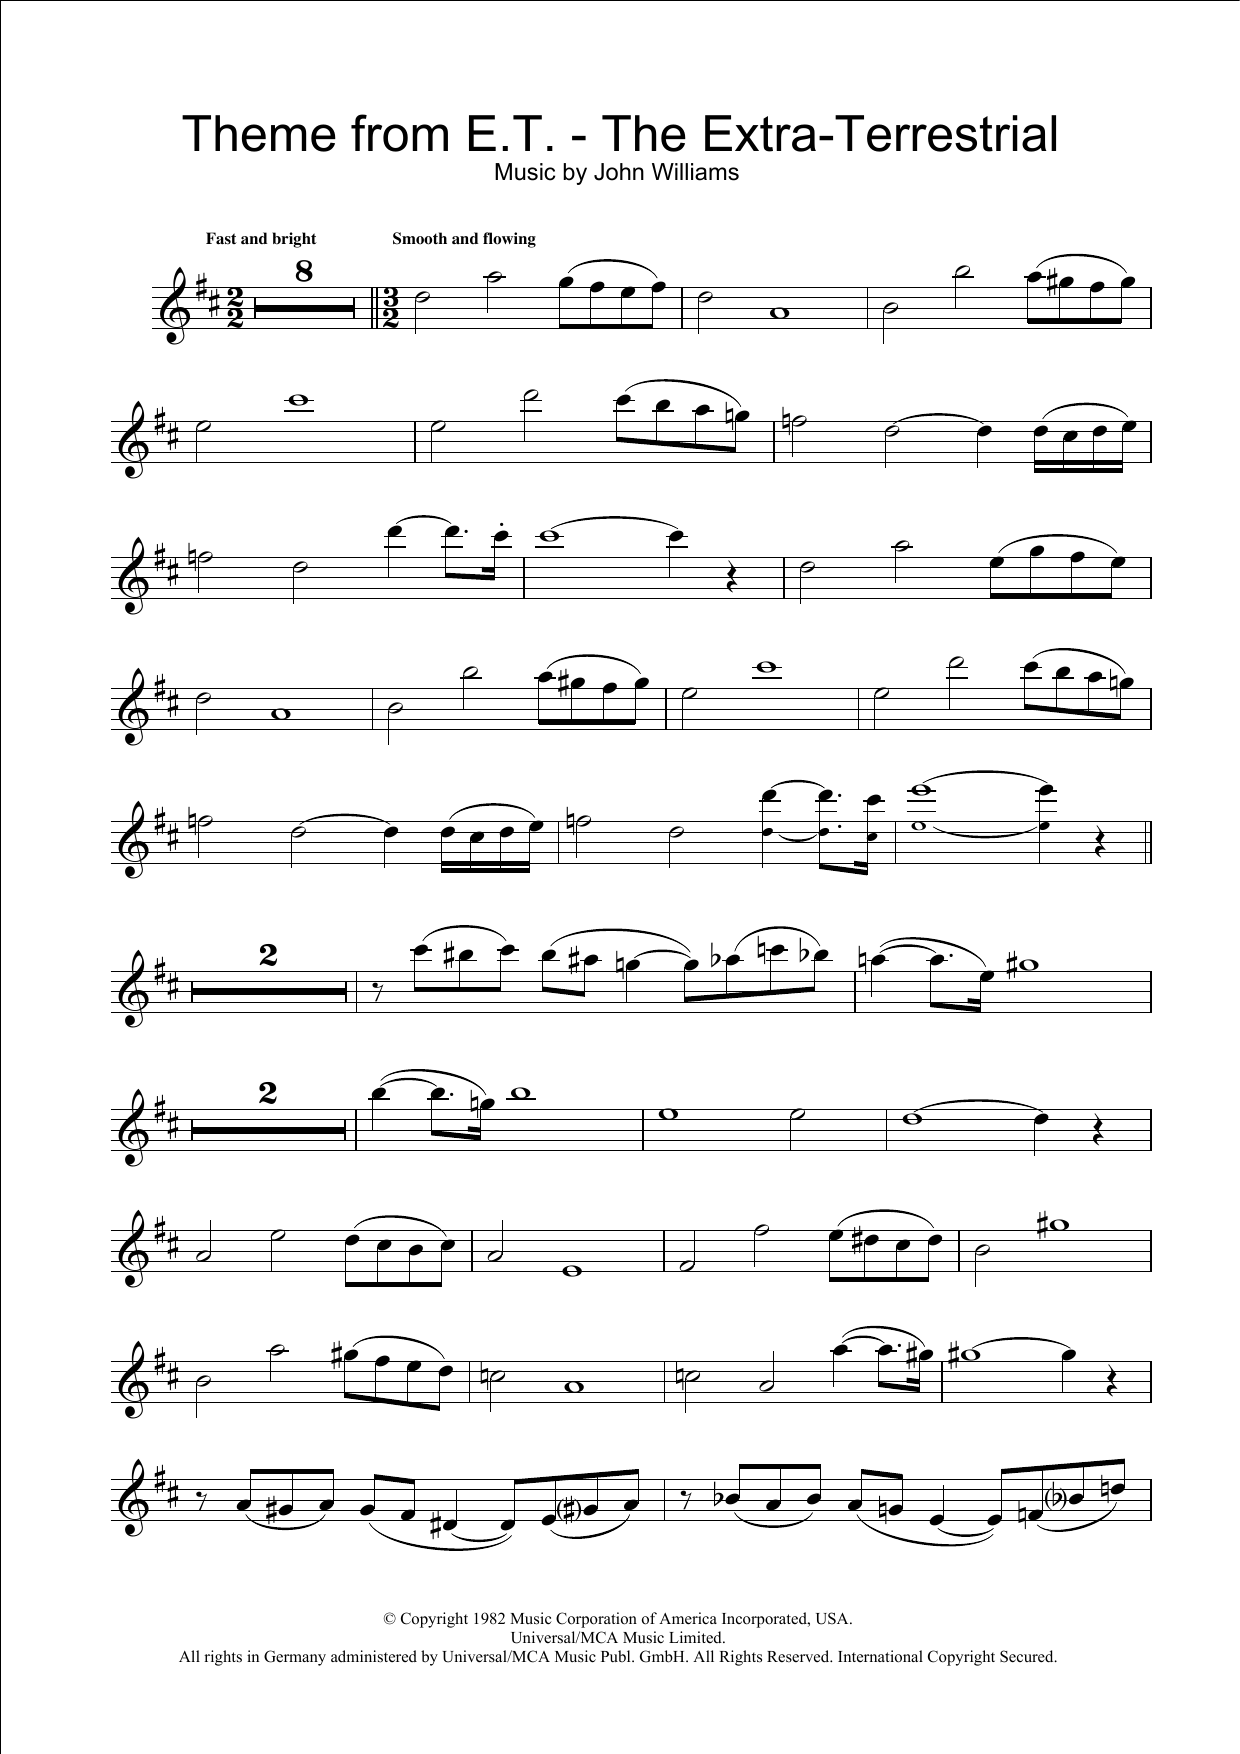 Download John Williams Theme from E.T. - The Extra-Terrestrial Sheet Music